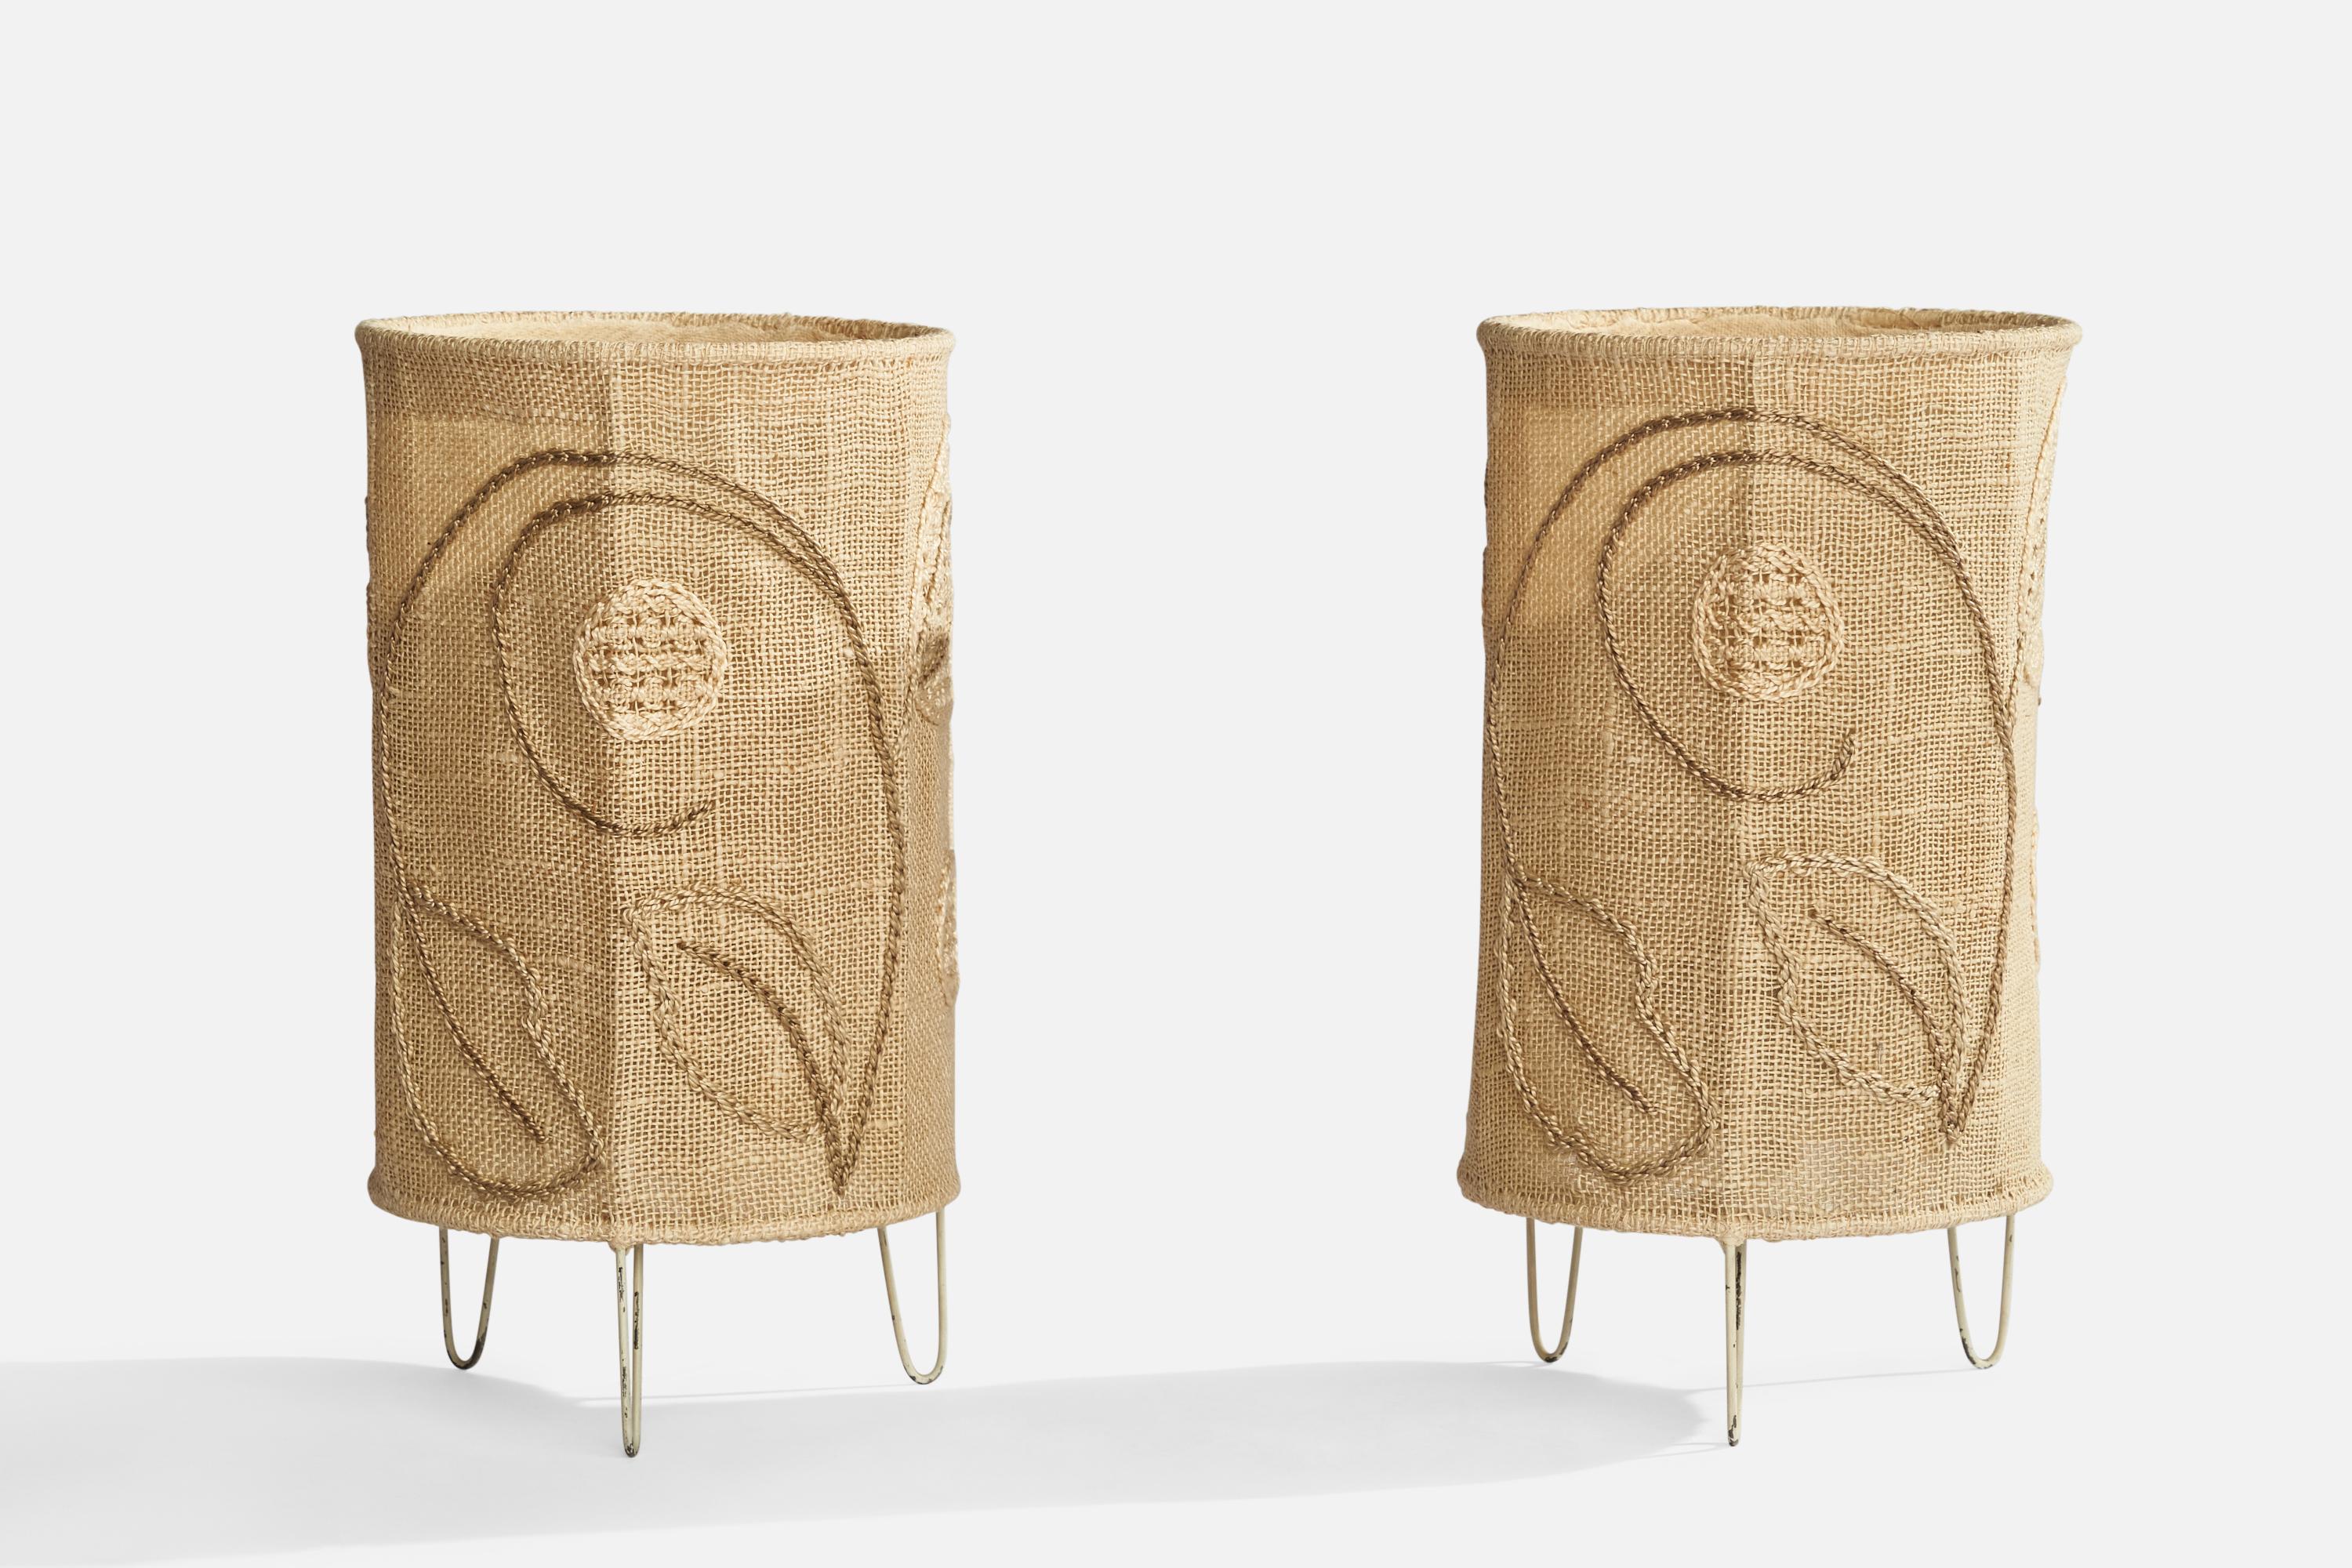 A pair of hand-embroidered burlap and white-lacquered metal table lamps designed and produced in Sweden, 1960s.

Overall Dimensions (inches): 11” H x 6”  D
Stated dimensions include shade.
Bulb Specifications: E-26 Bulb
Number of Sockets: 2
All